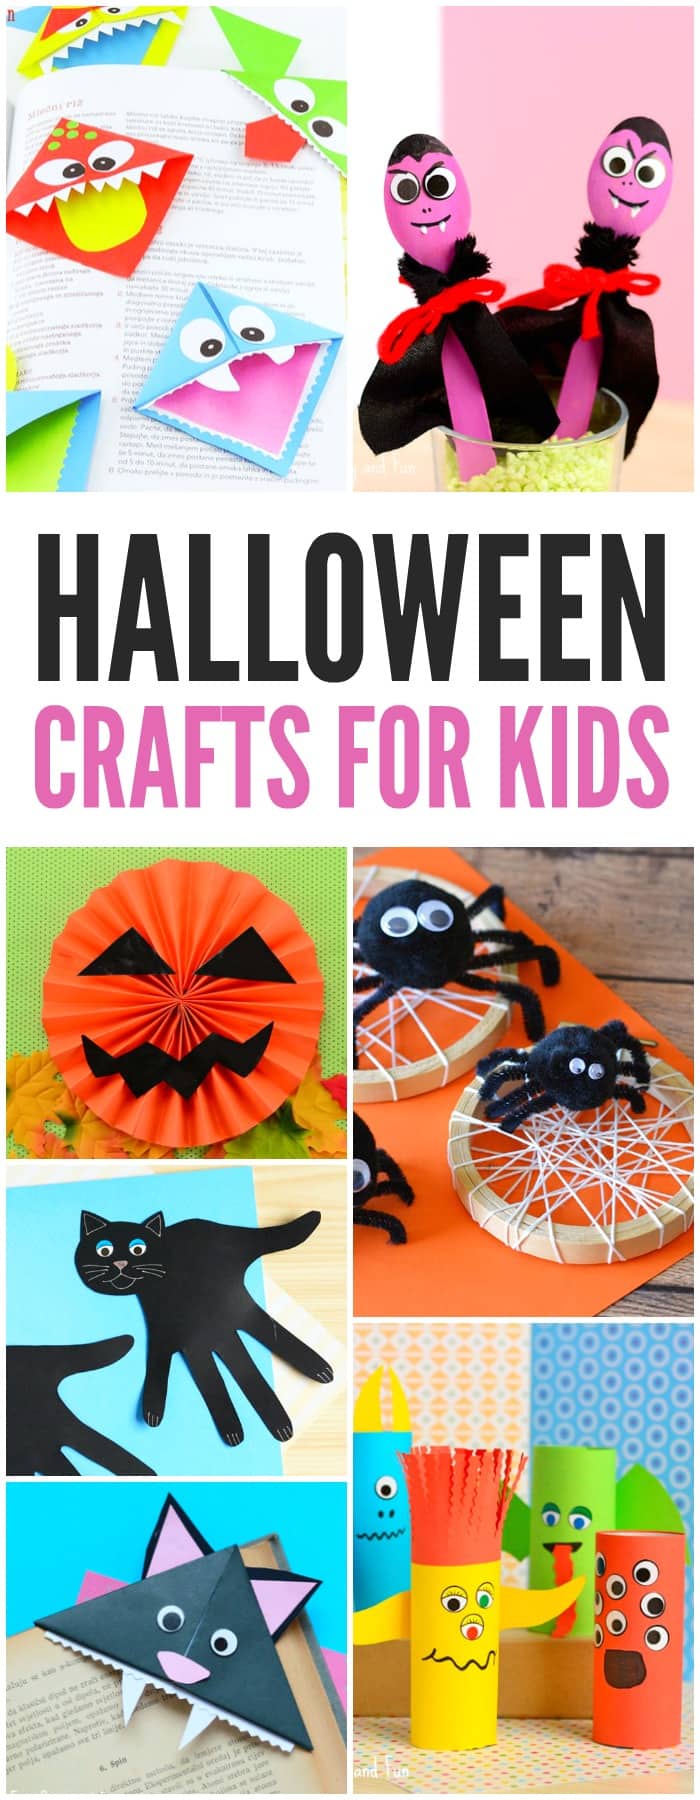 Lots of great Halloween crafts for kids, from simple ideas for toddlers and preschoolers to art and craft tutorials for older kids. Simple and fun.